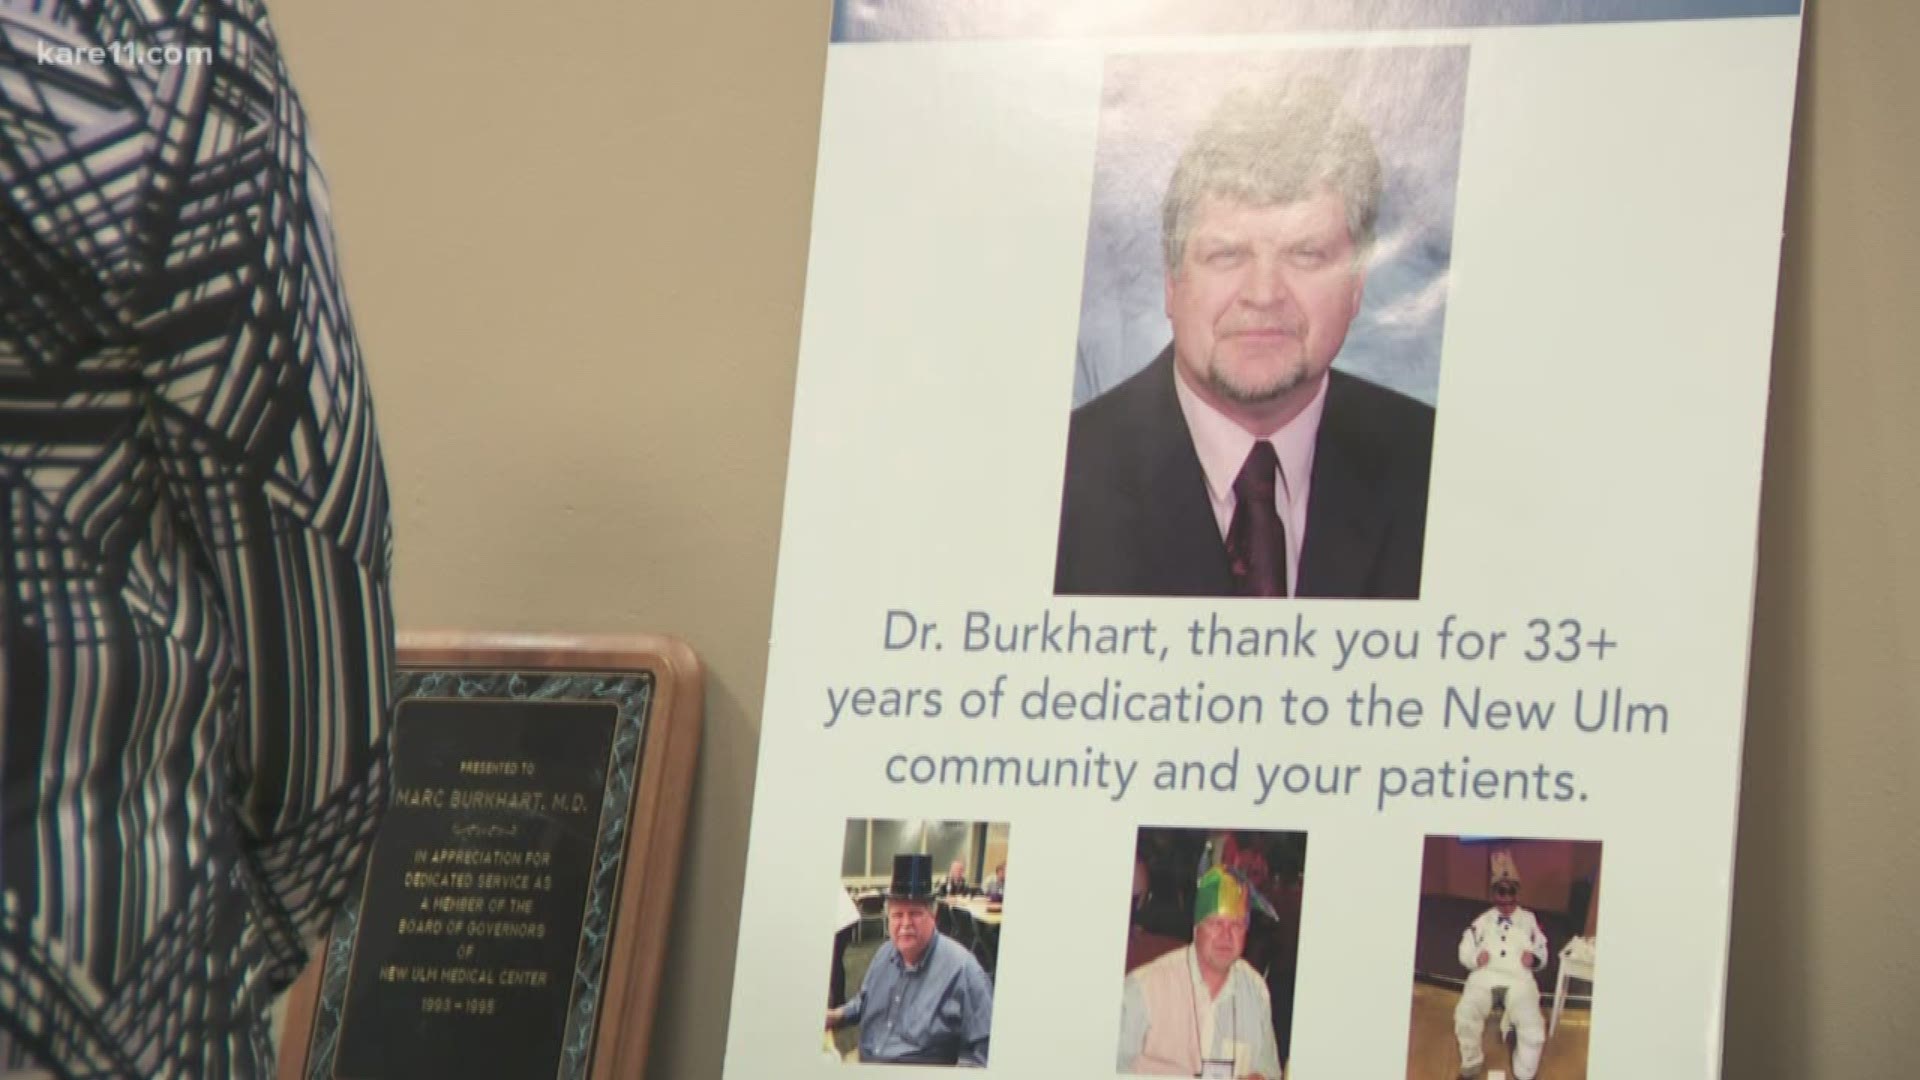 Dr. Marc Burkhart's retirement party was attended by the first and last baby he delivered.